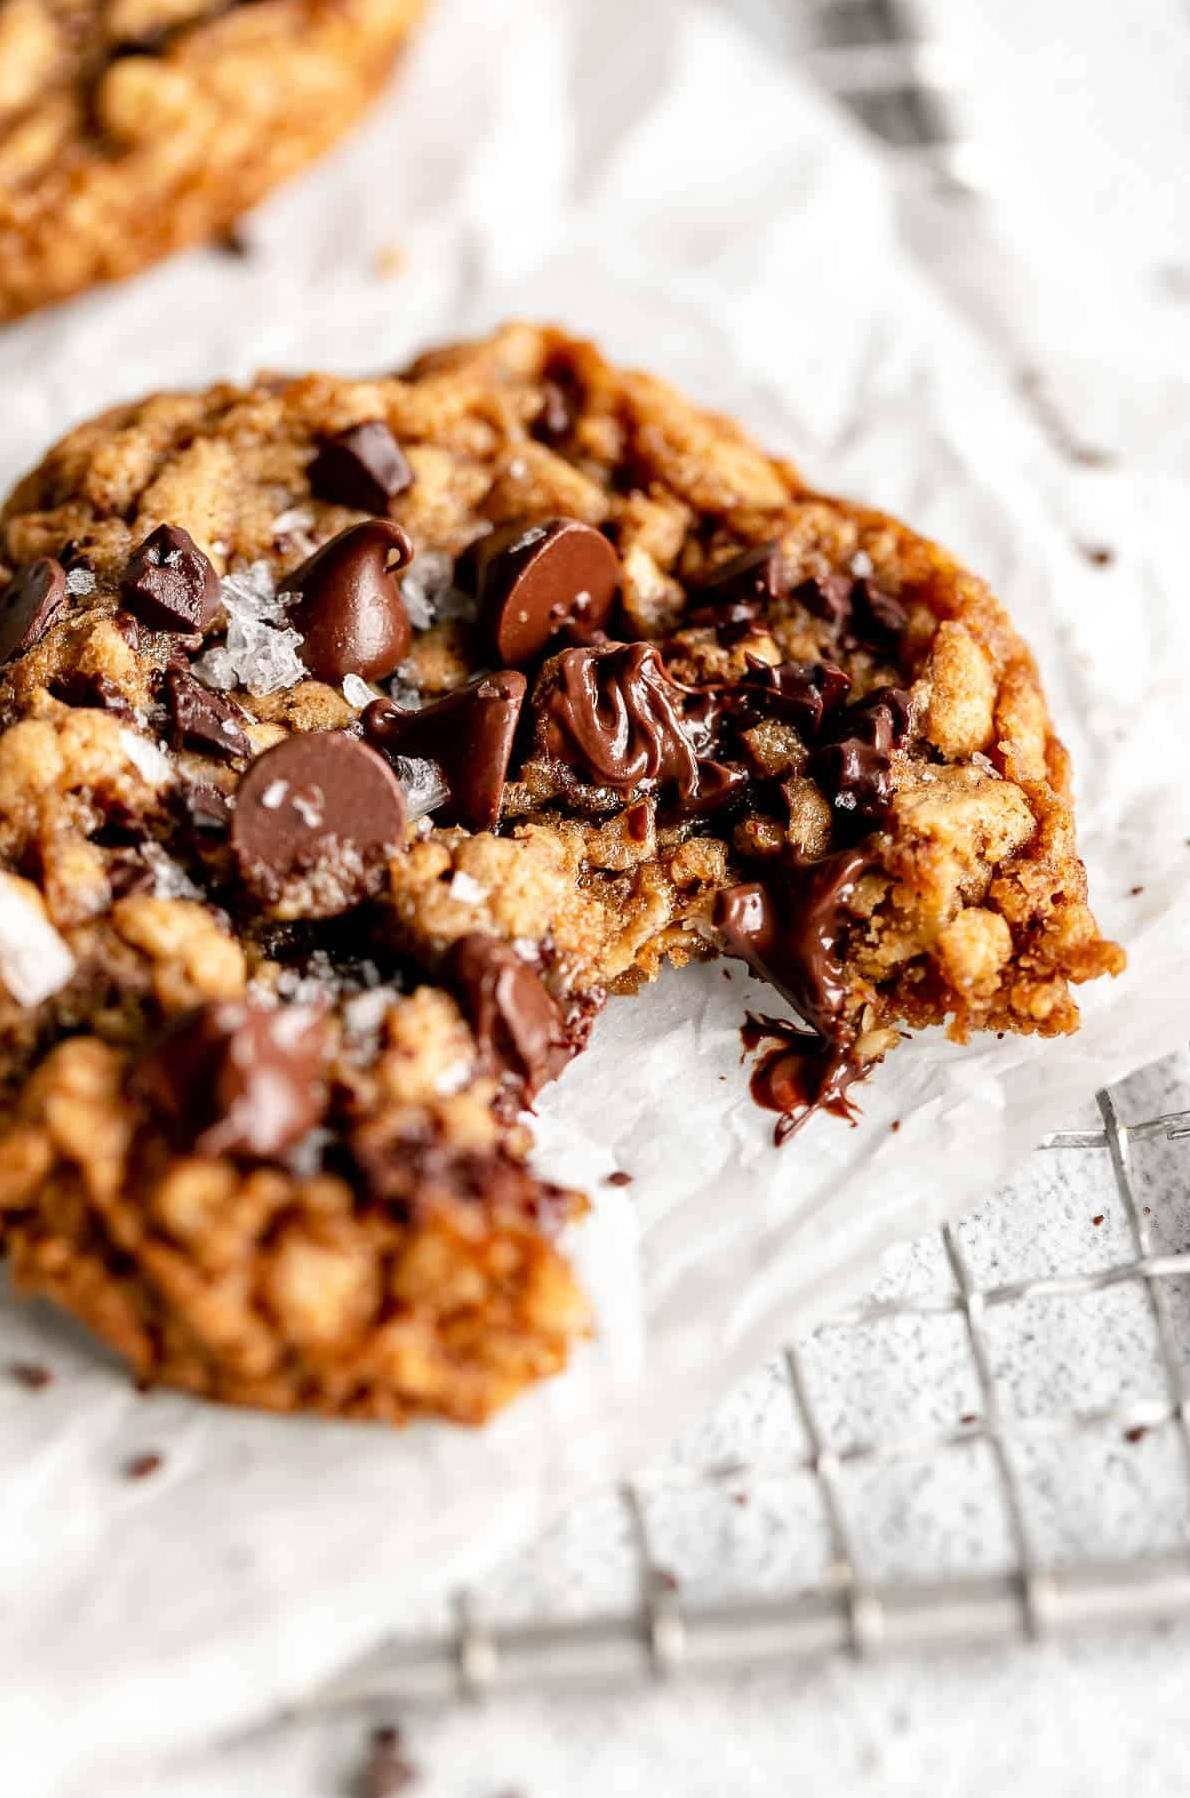  Health and flavor come hand in hand with these gluten-free chocolate chip oatmeal cookies.